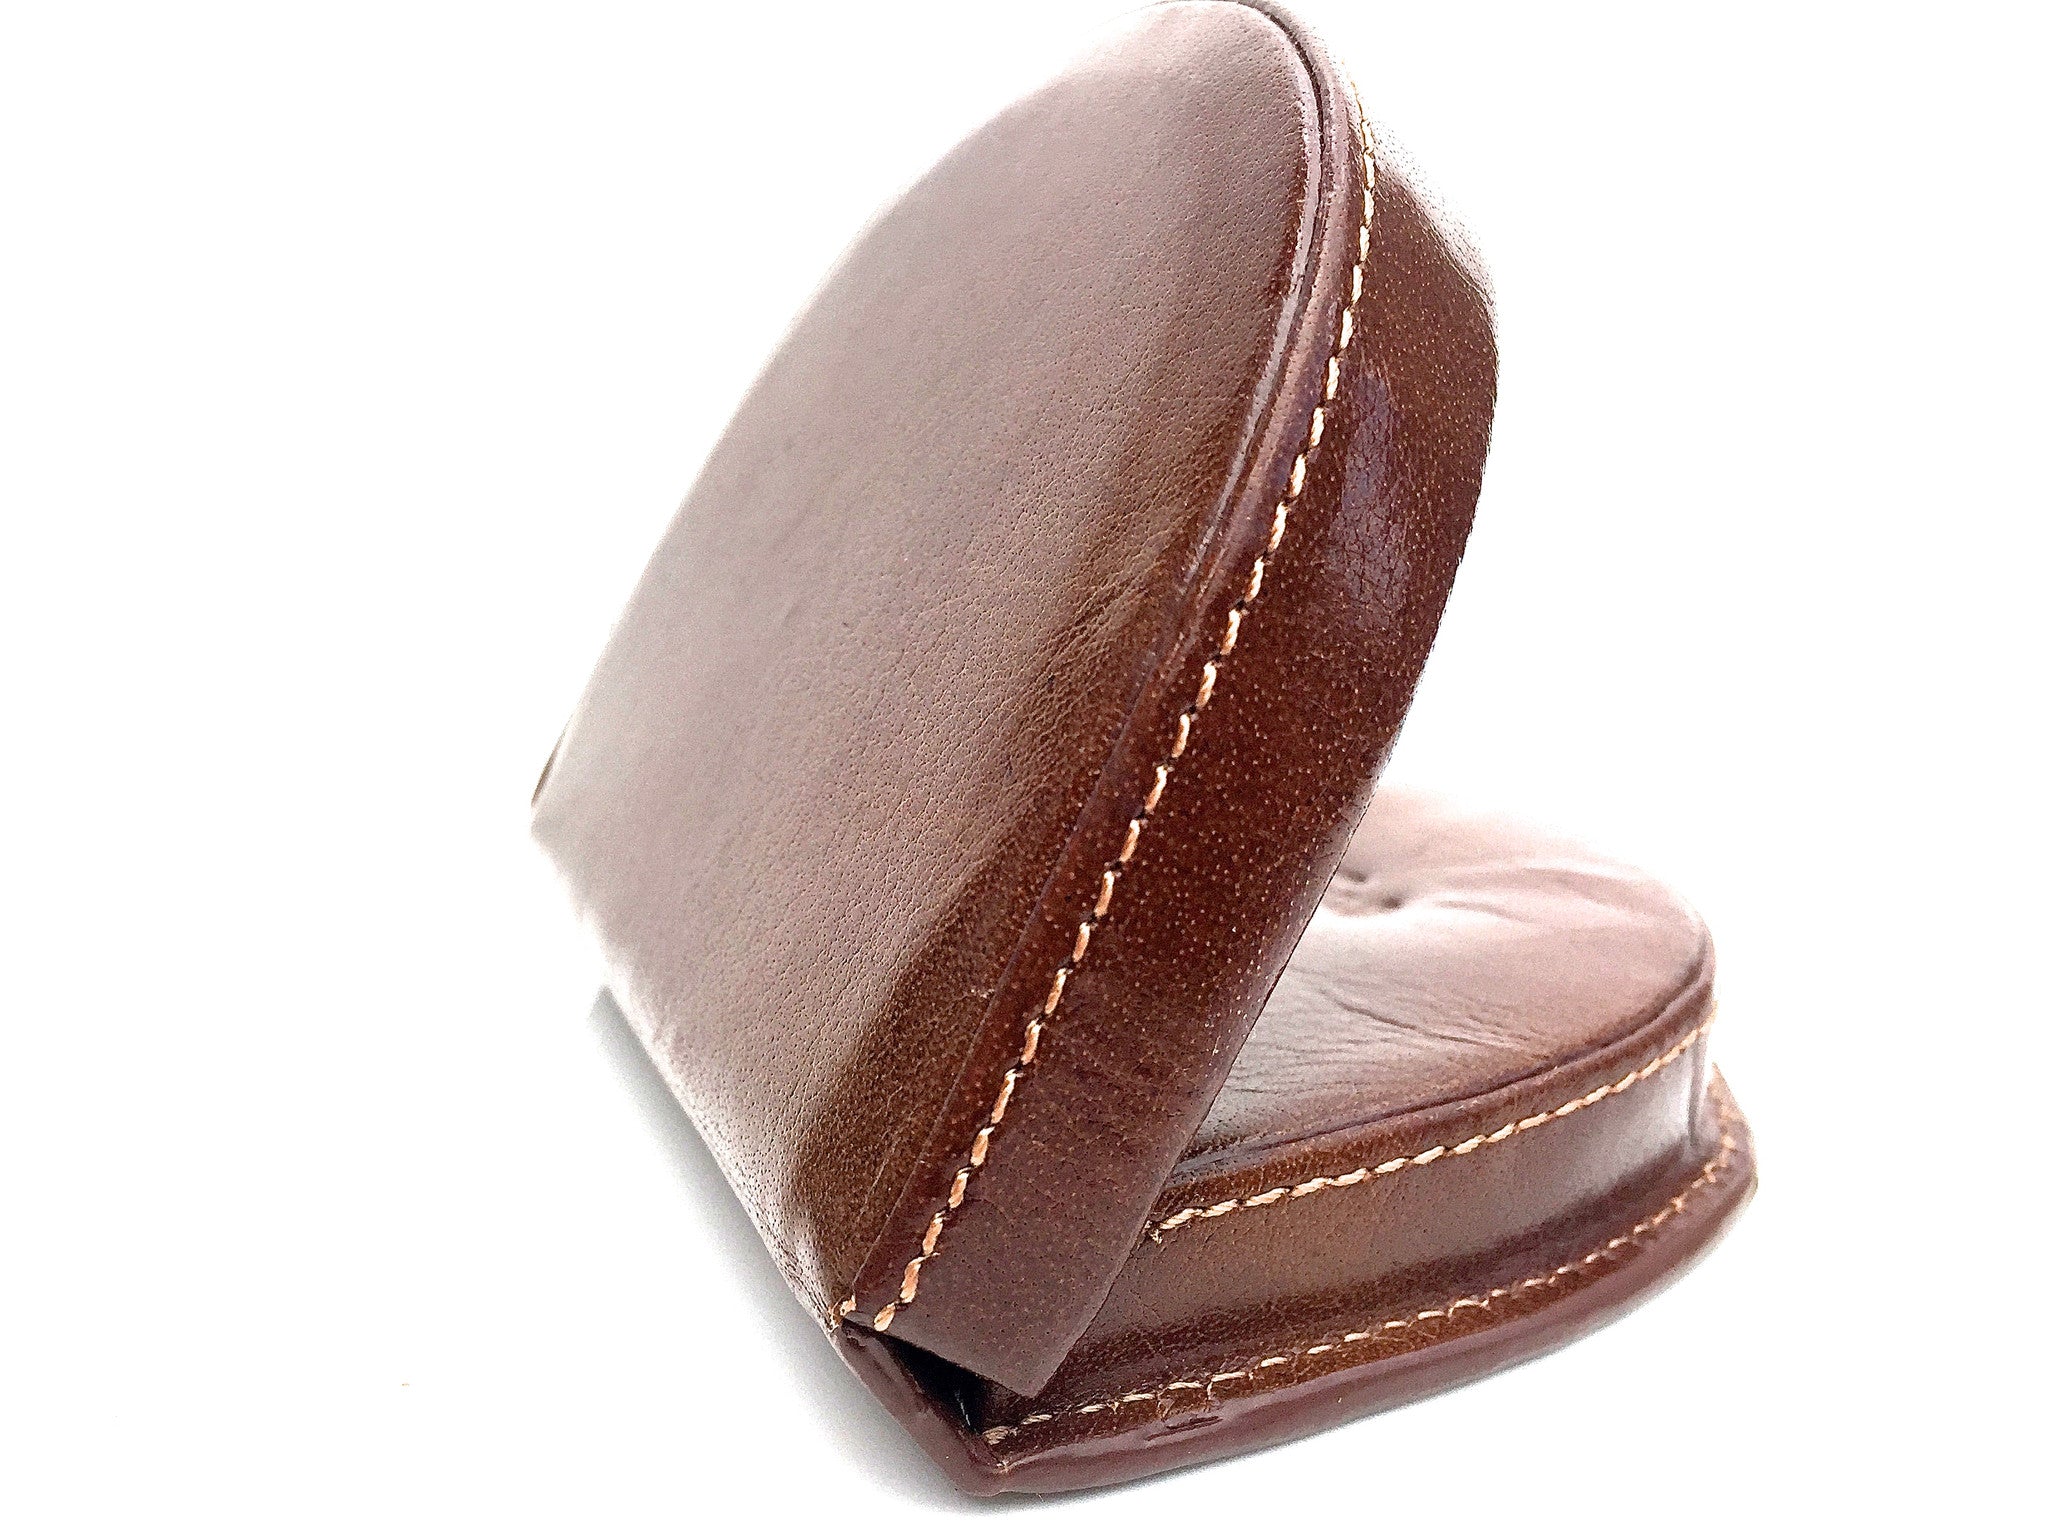 Mens Leather Horseshoe Coin Tray Purse 142a In Tan By Golunski - Baked Apple WM Ltd